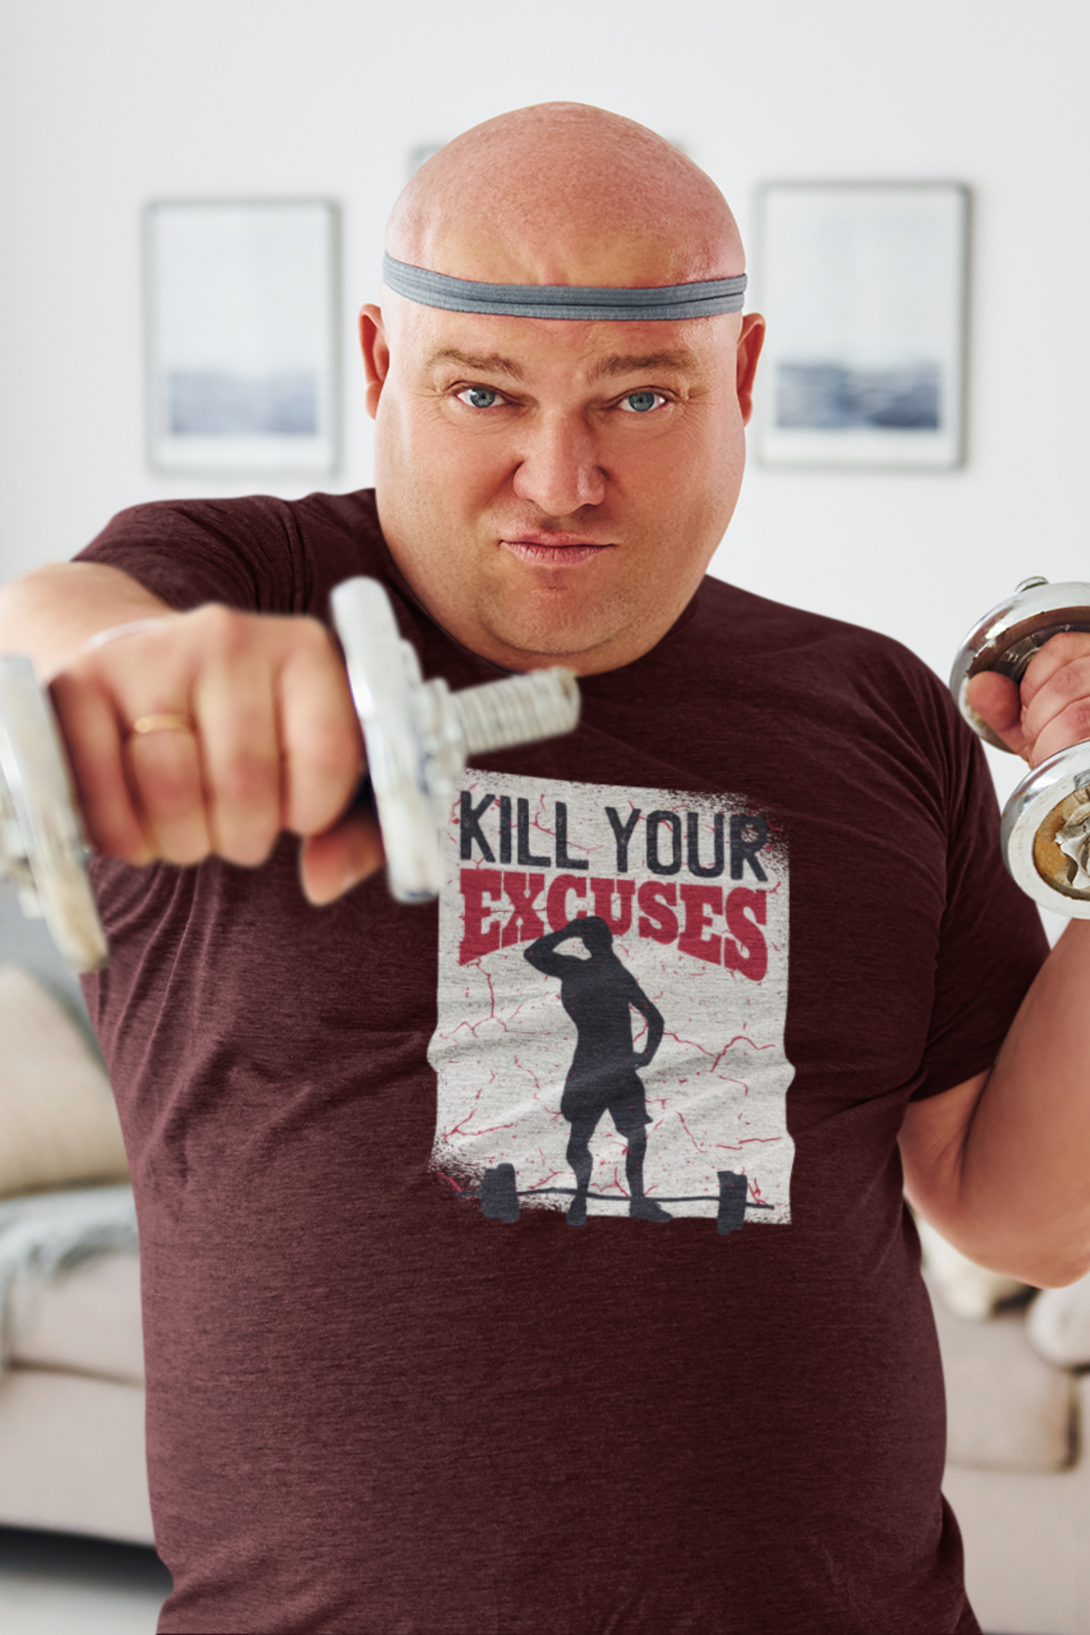 Kill Your Excuses Printed T-Shirt For Men - WowWaves - 5